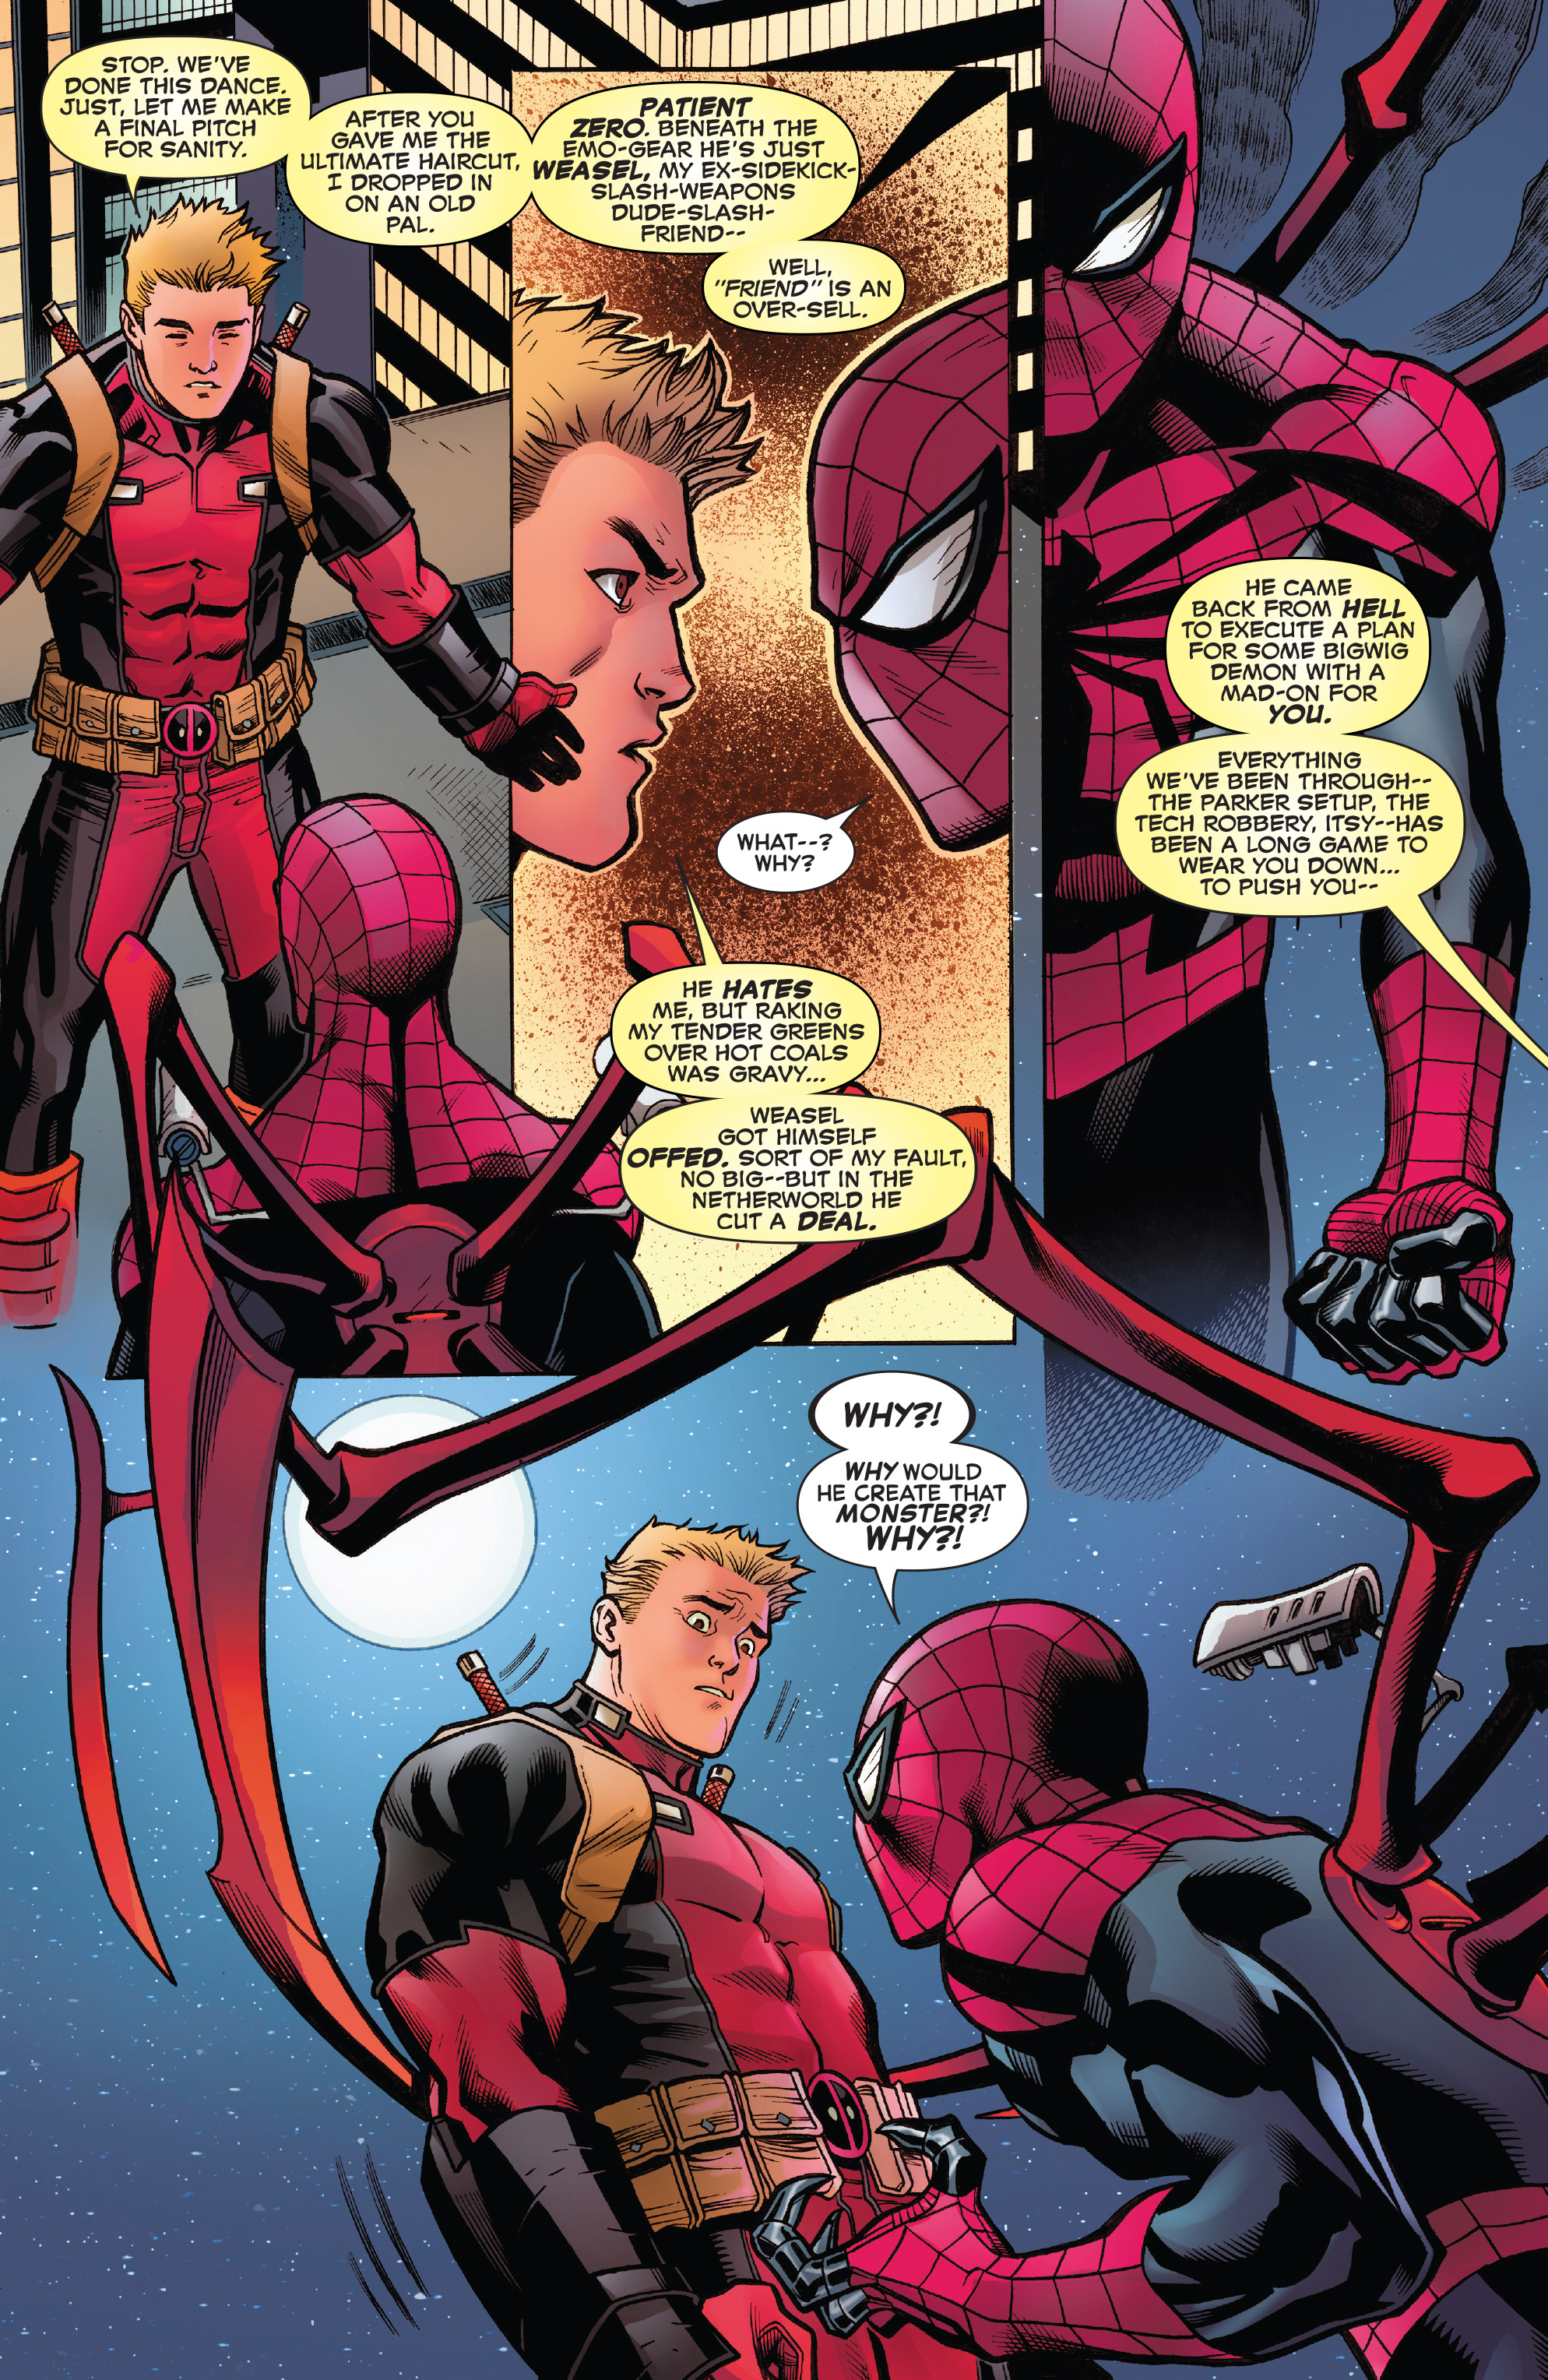 Spider Mandeadpool 2016 Chapter 17 Page 7